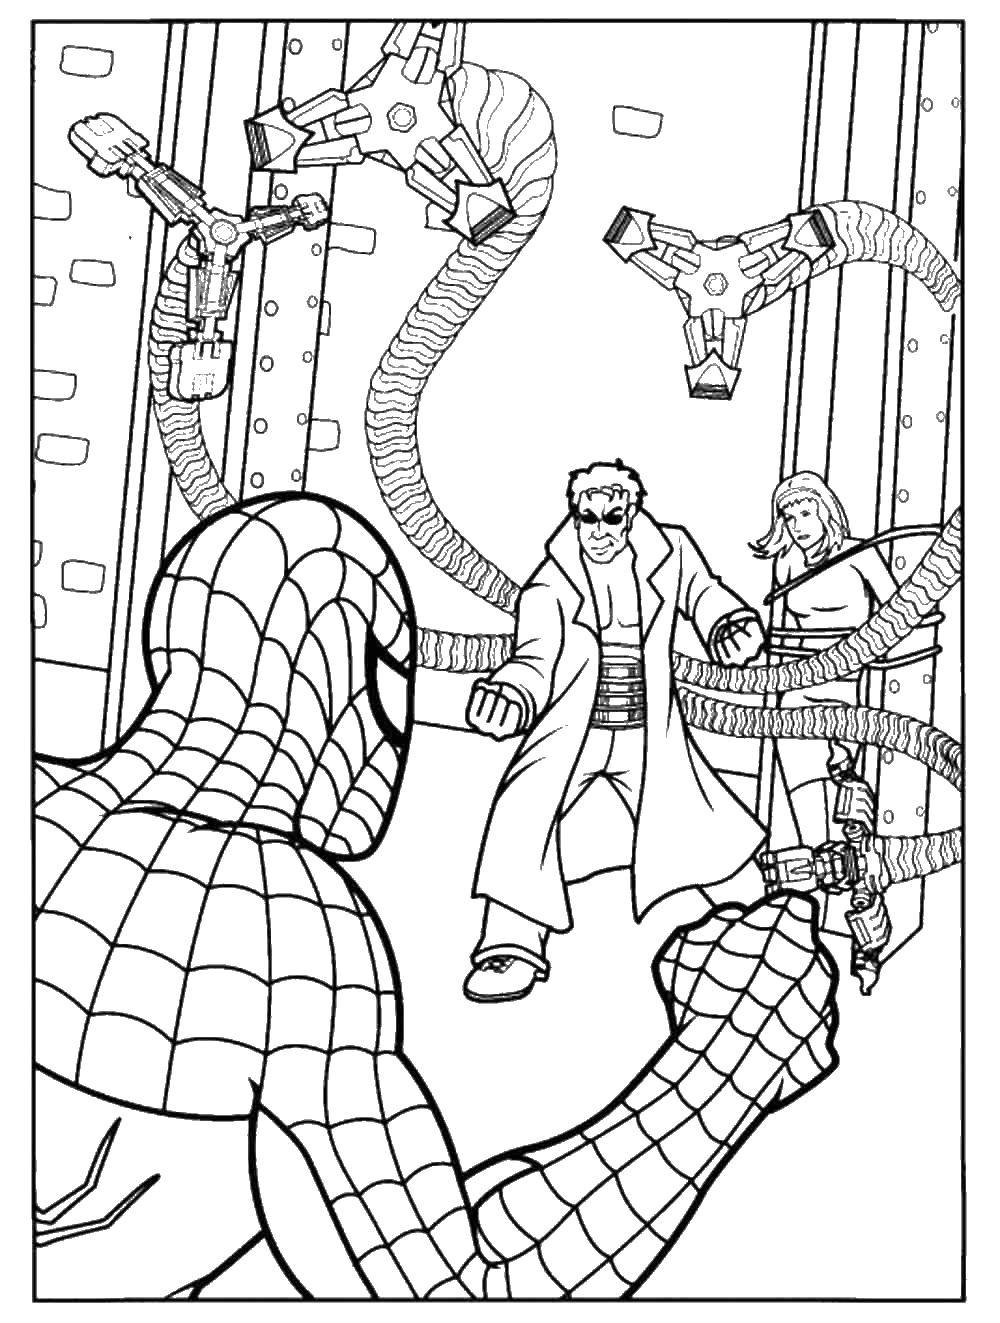 Coloring Spider-man fights with the enemy. Category Comics. Tags:  Comics, Spider-Man, Spider-Man.